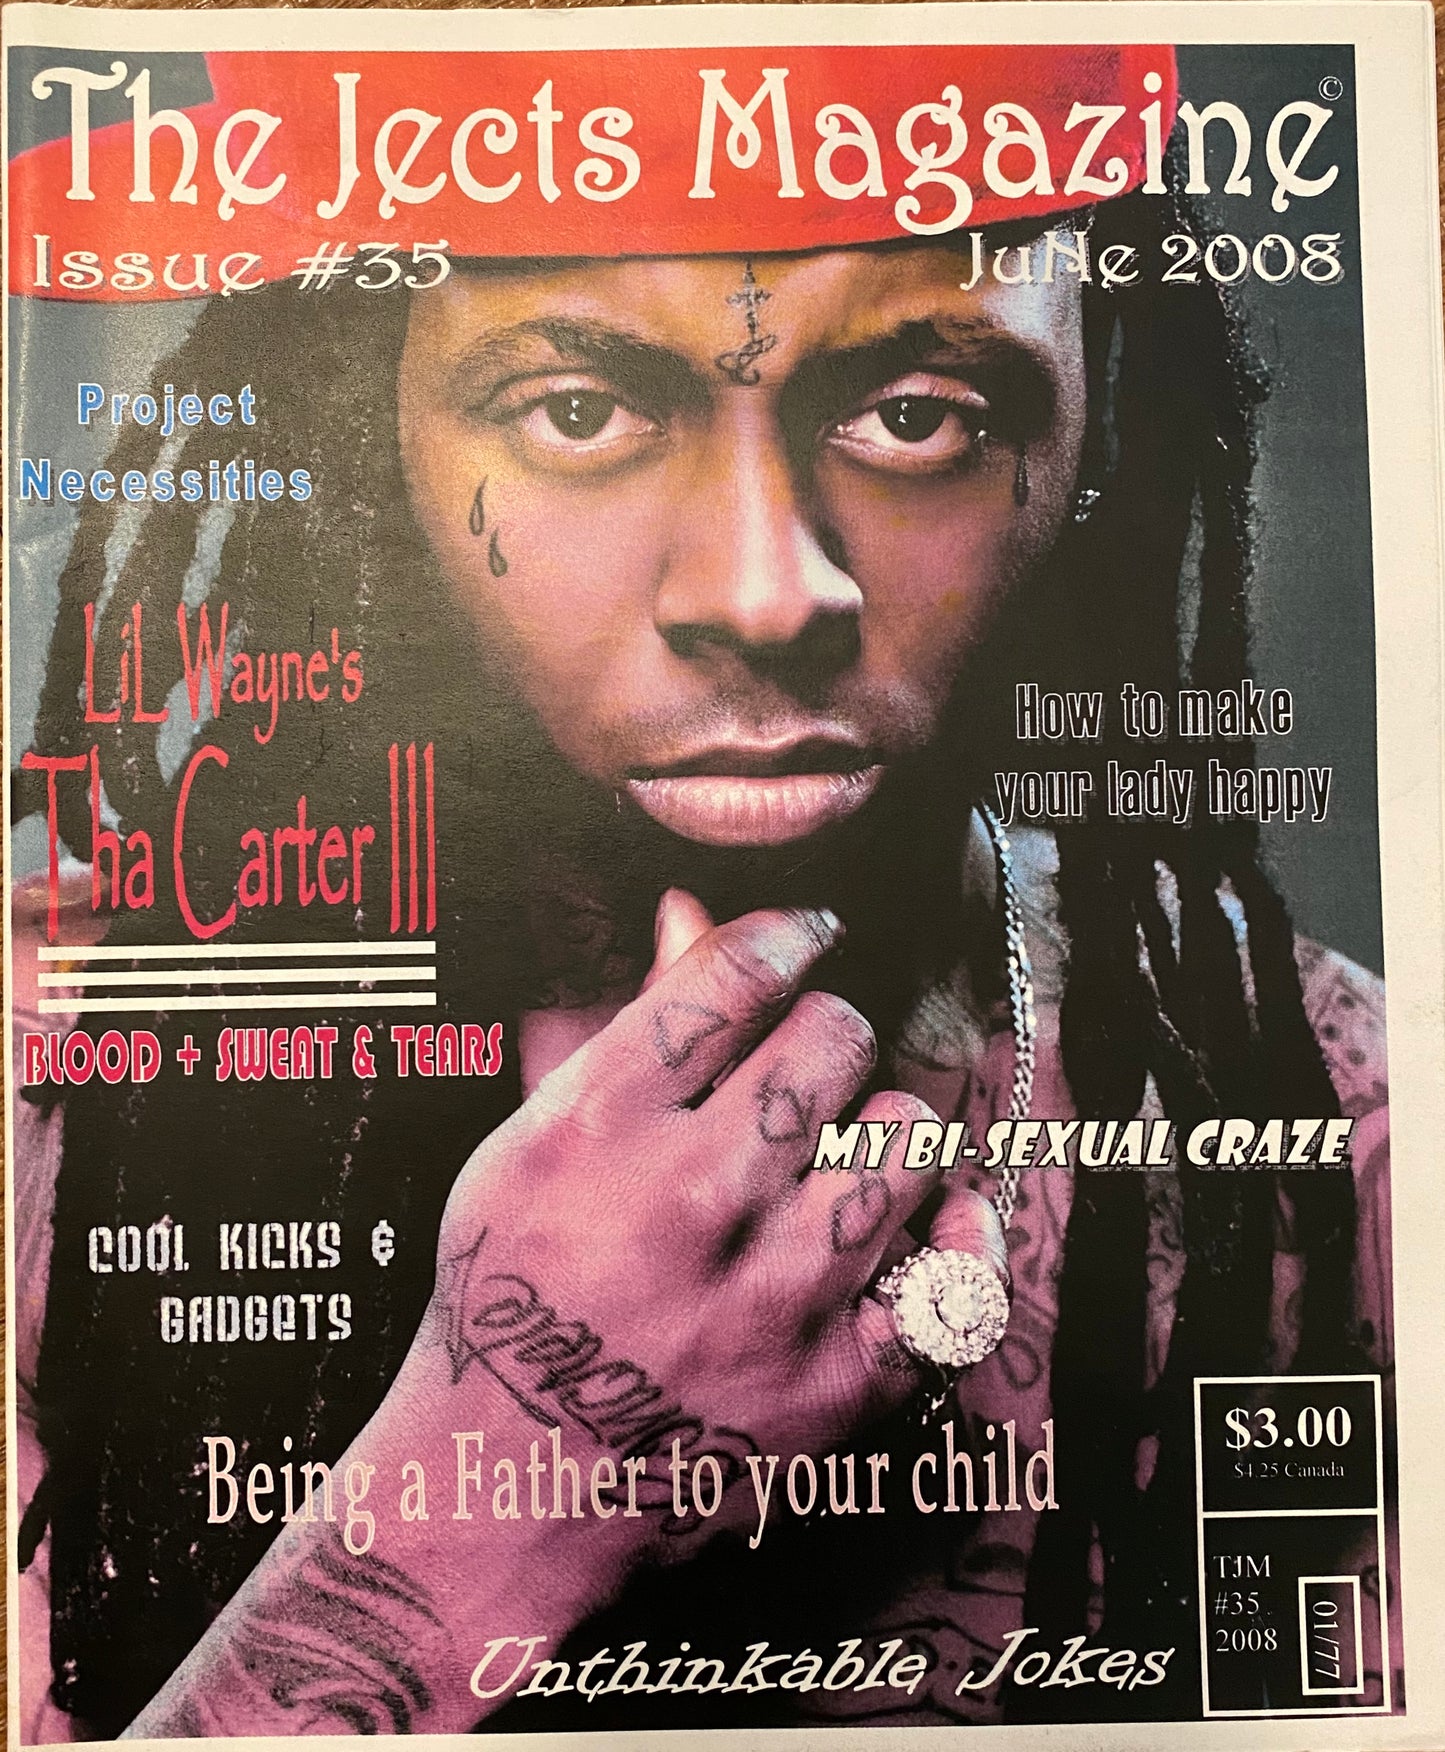 The Jects Magazine Issue 35 Lil Wayne - MoSneaks Shop Online